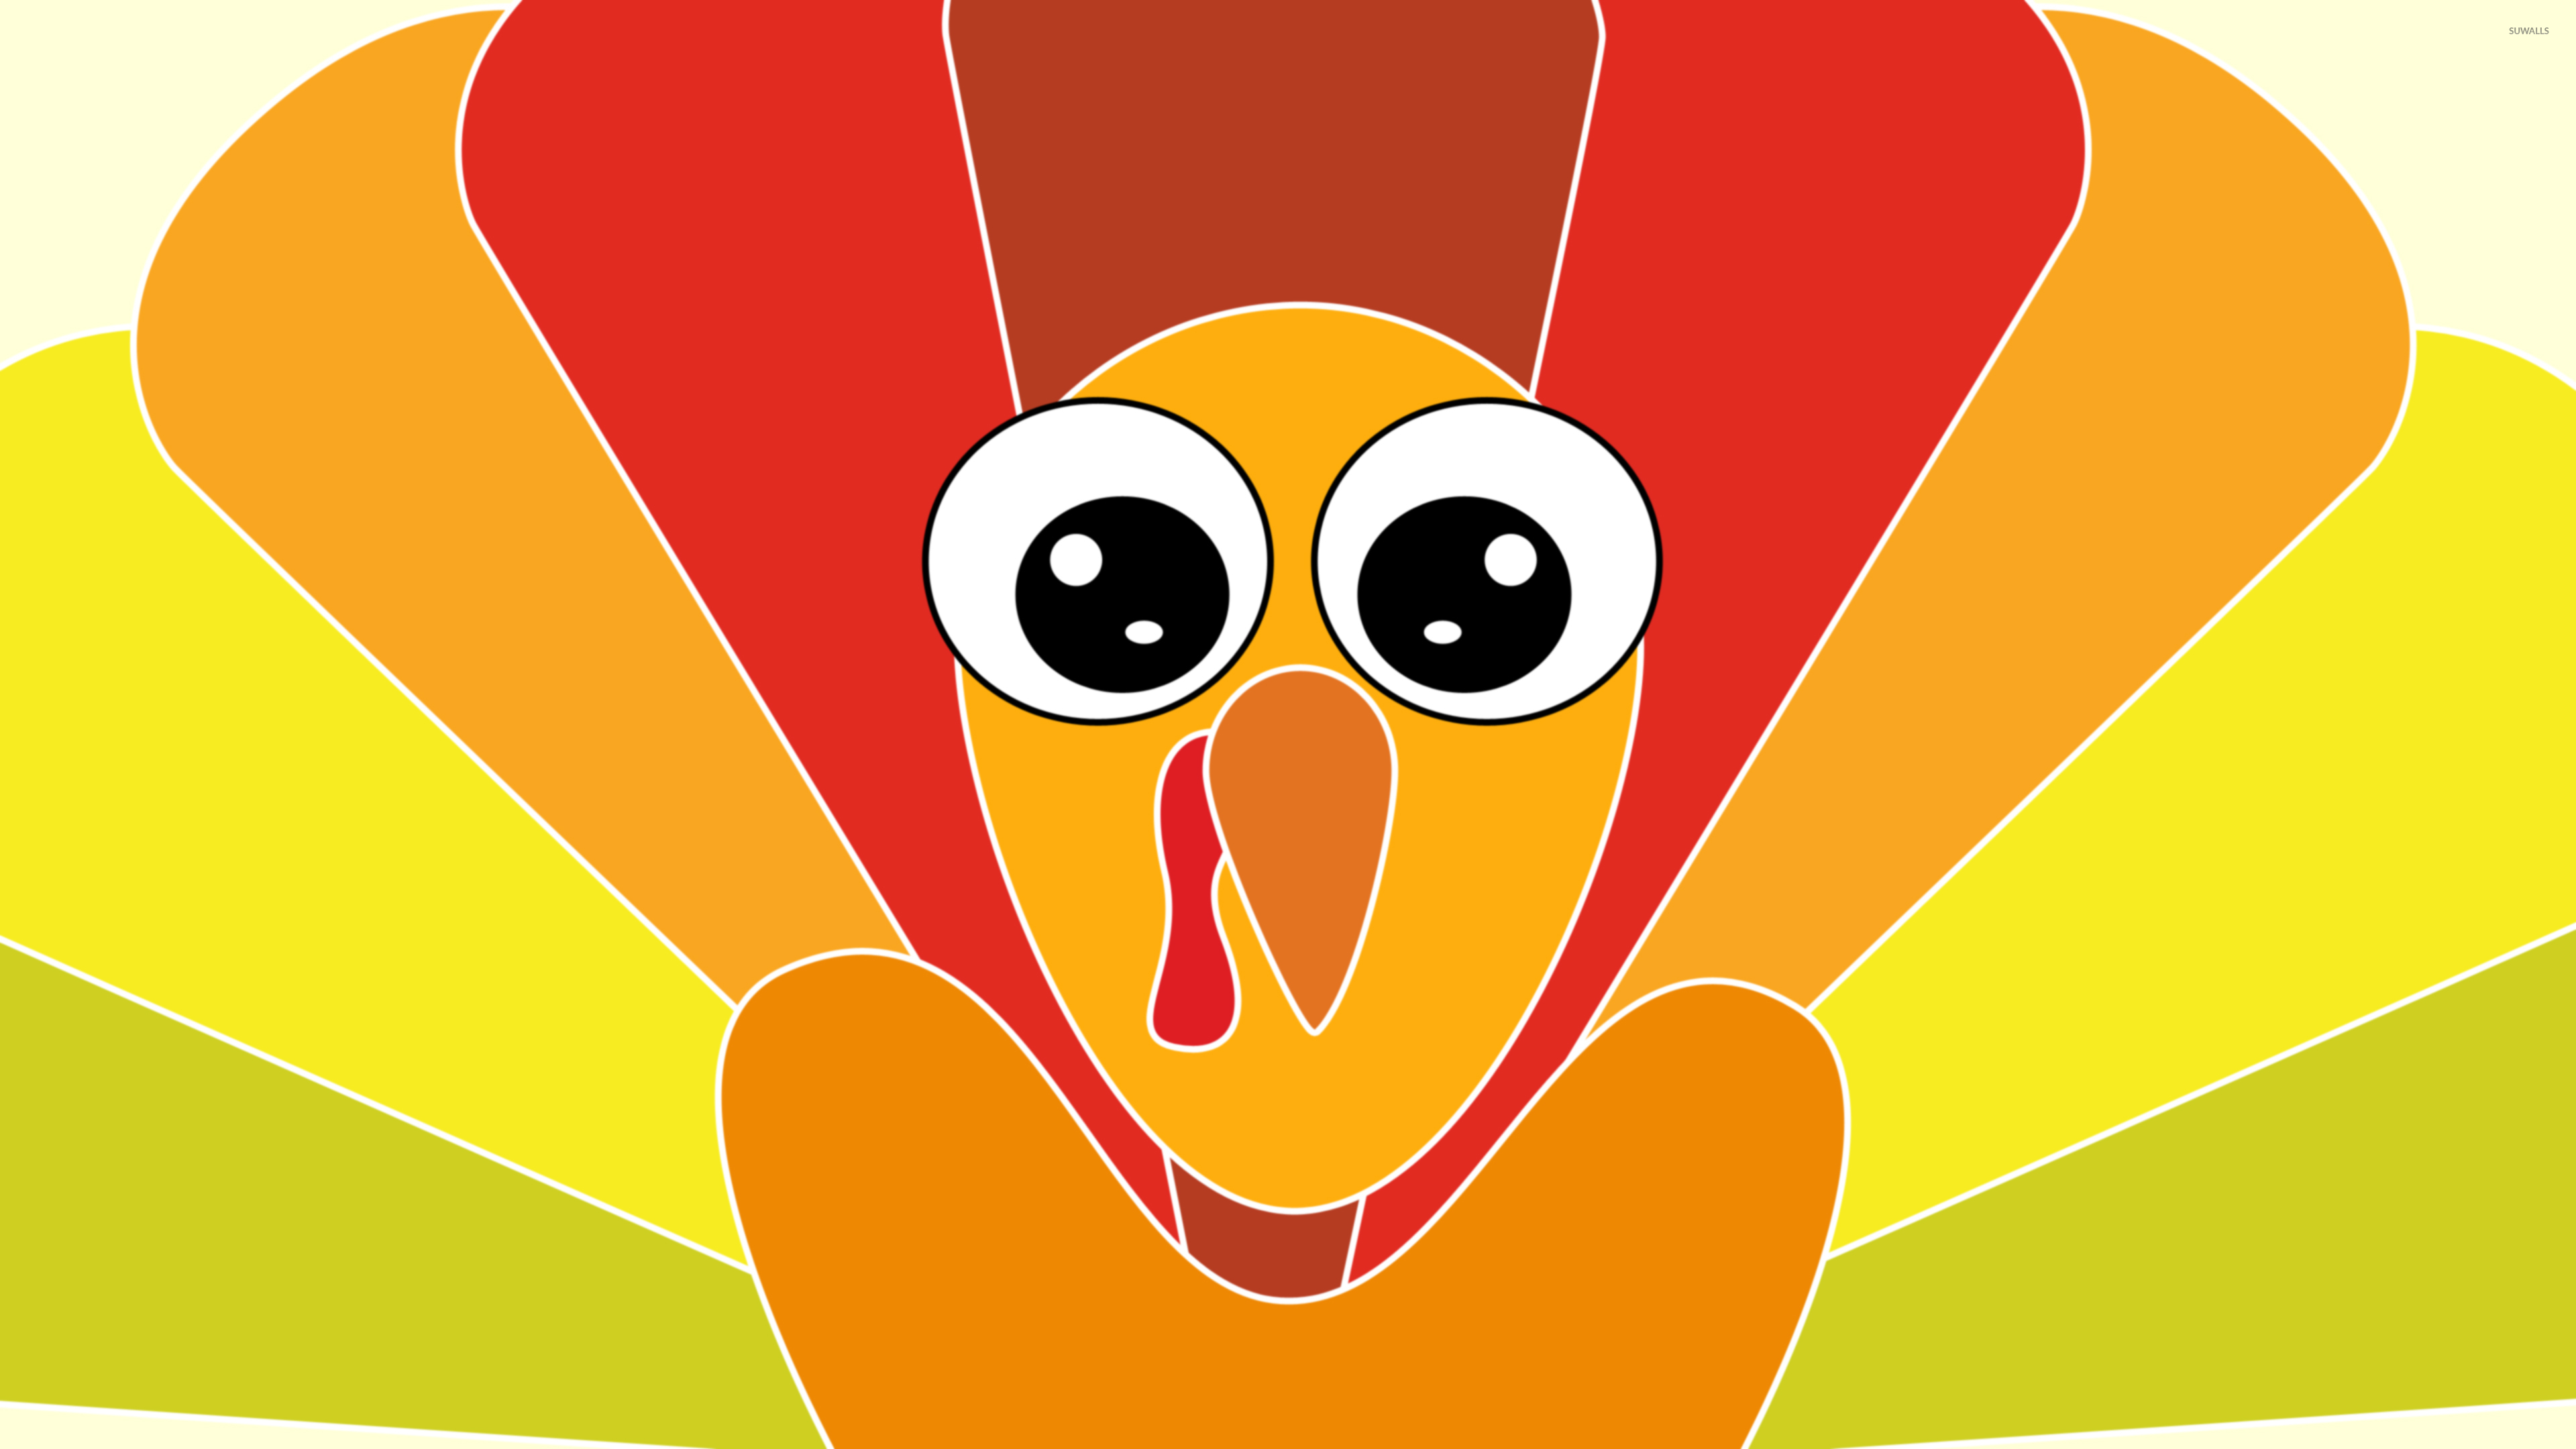 Funny turkey wallpaper - Holiday wallpapers - #49970